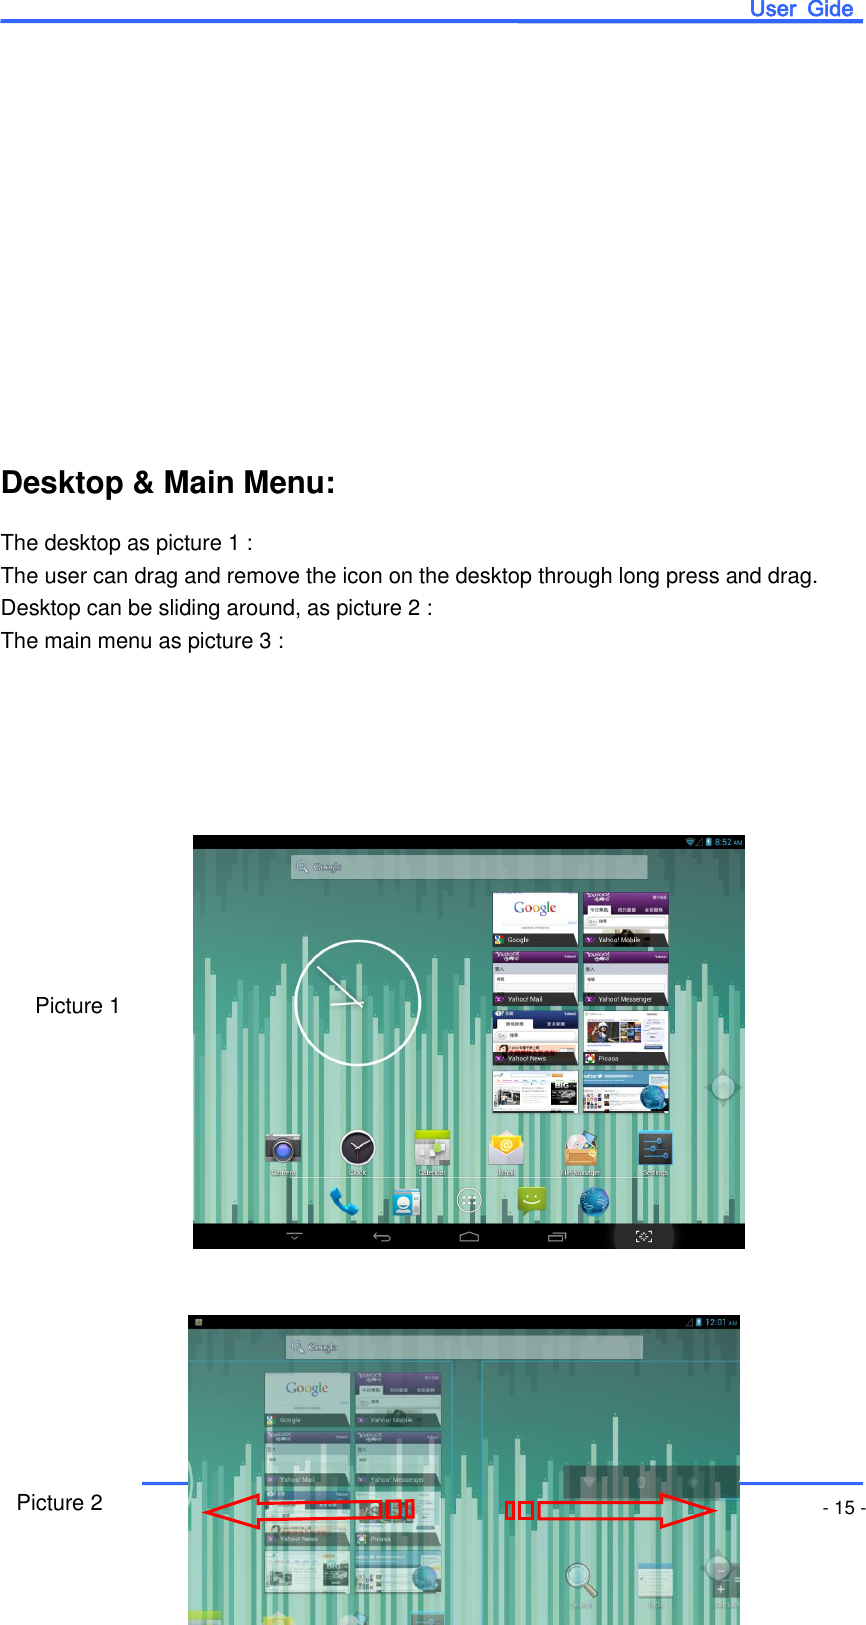                       User  Gide MID - 15 -            Desktop &amp; Main Menu: The desktop as picture 1 : The user can drag and remove the icon on the desktop through long press and drag. Desktop can be sliding around, as picture 2 : The main menu as picture 3 :                          Picture 1 Picture 2 